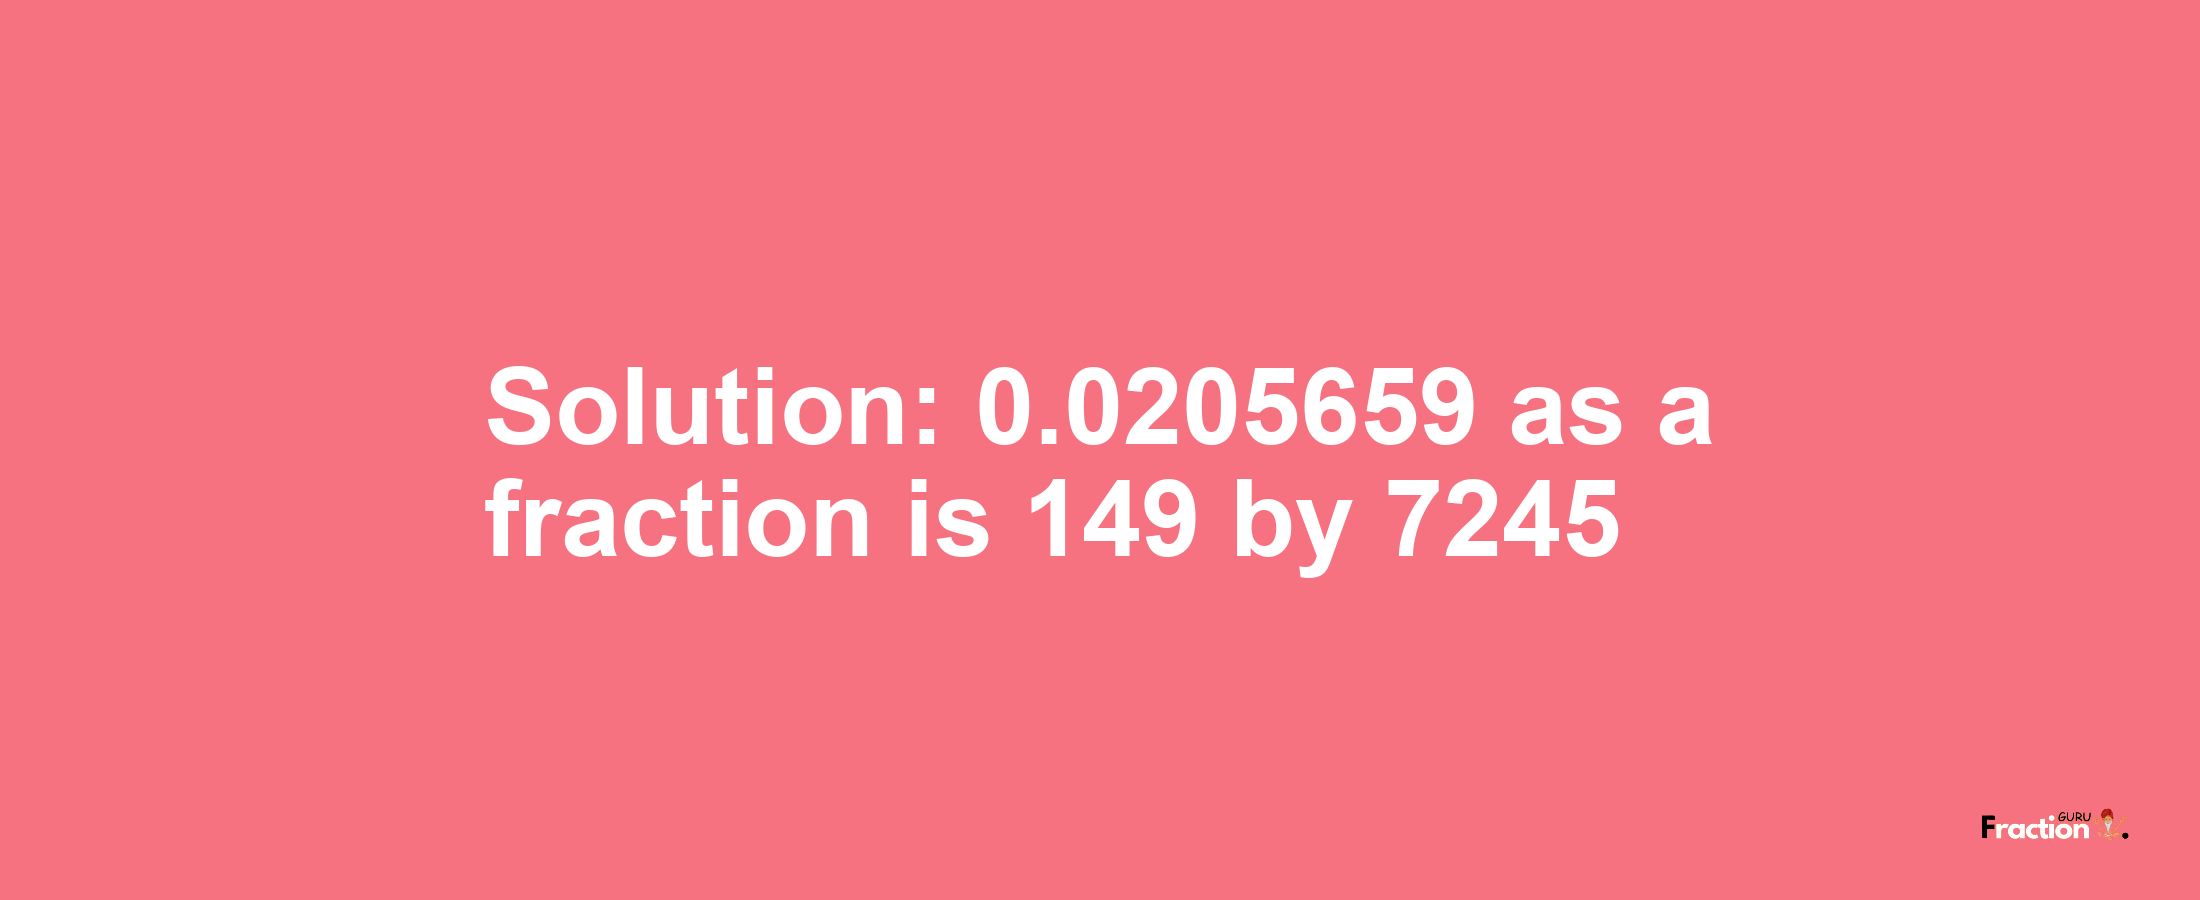 Solution:0.0205659 as a fraction is 149/7245